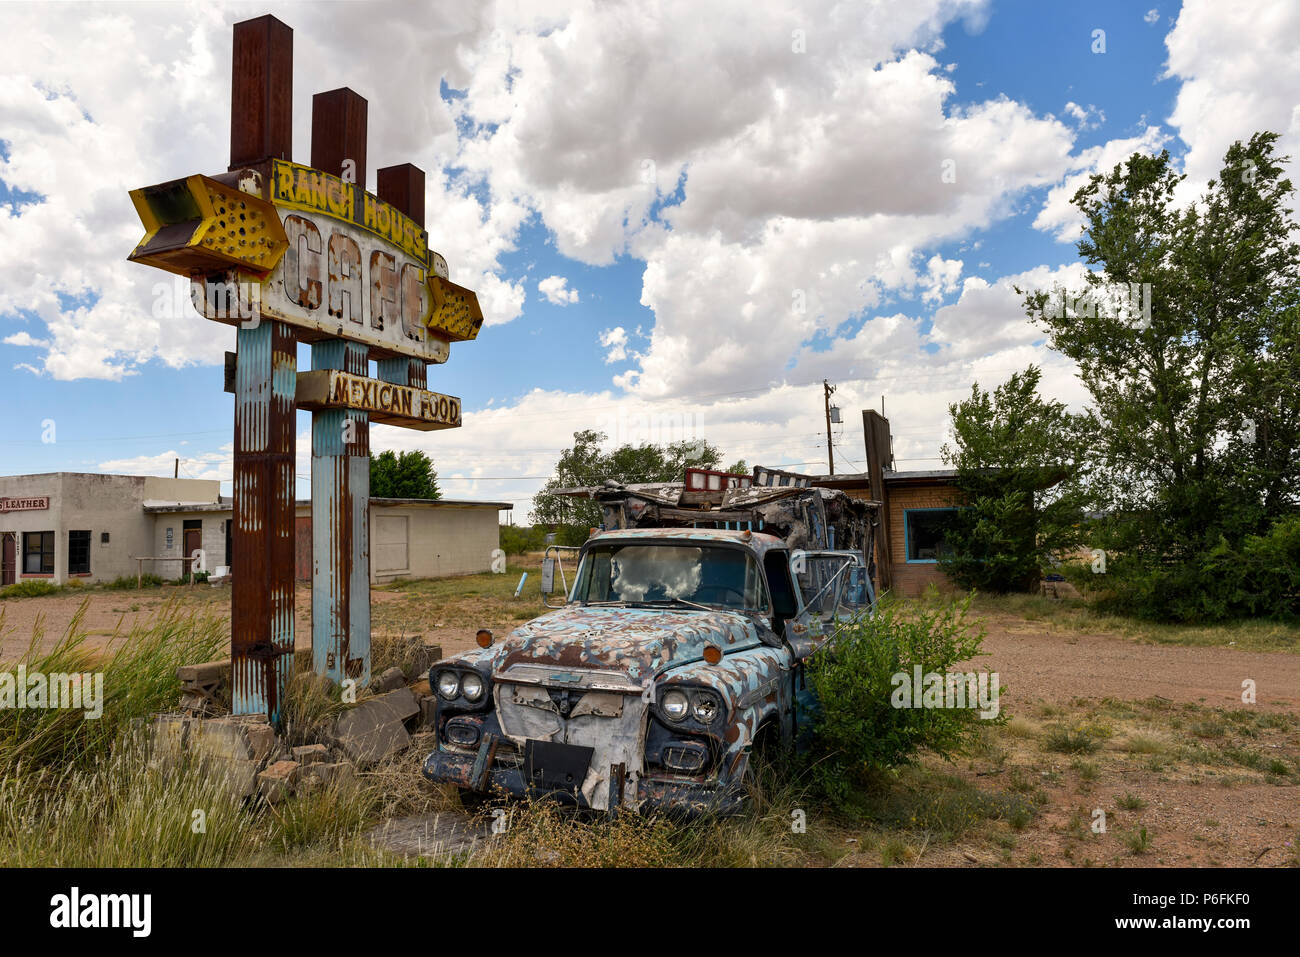 Old sign for the Ranch House Cafe on Route 66 in Santa Rosa, New Mexico Stock Photo